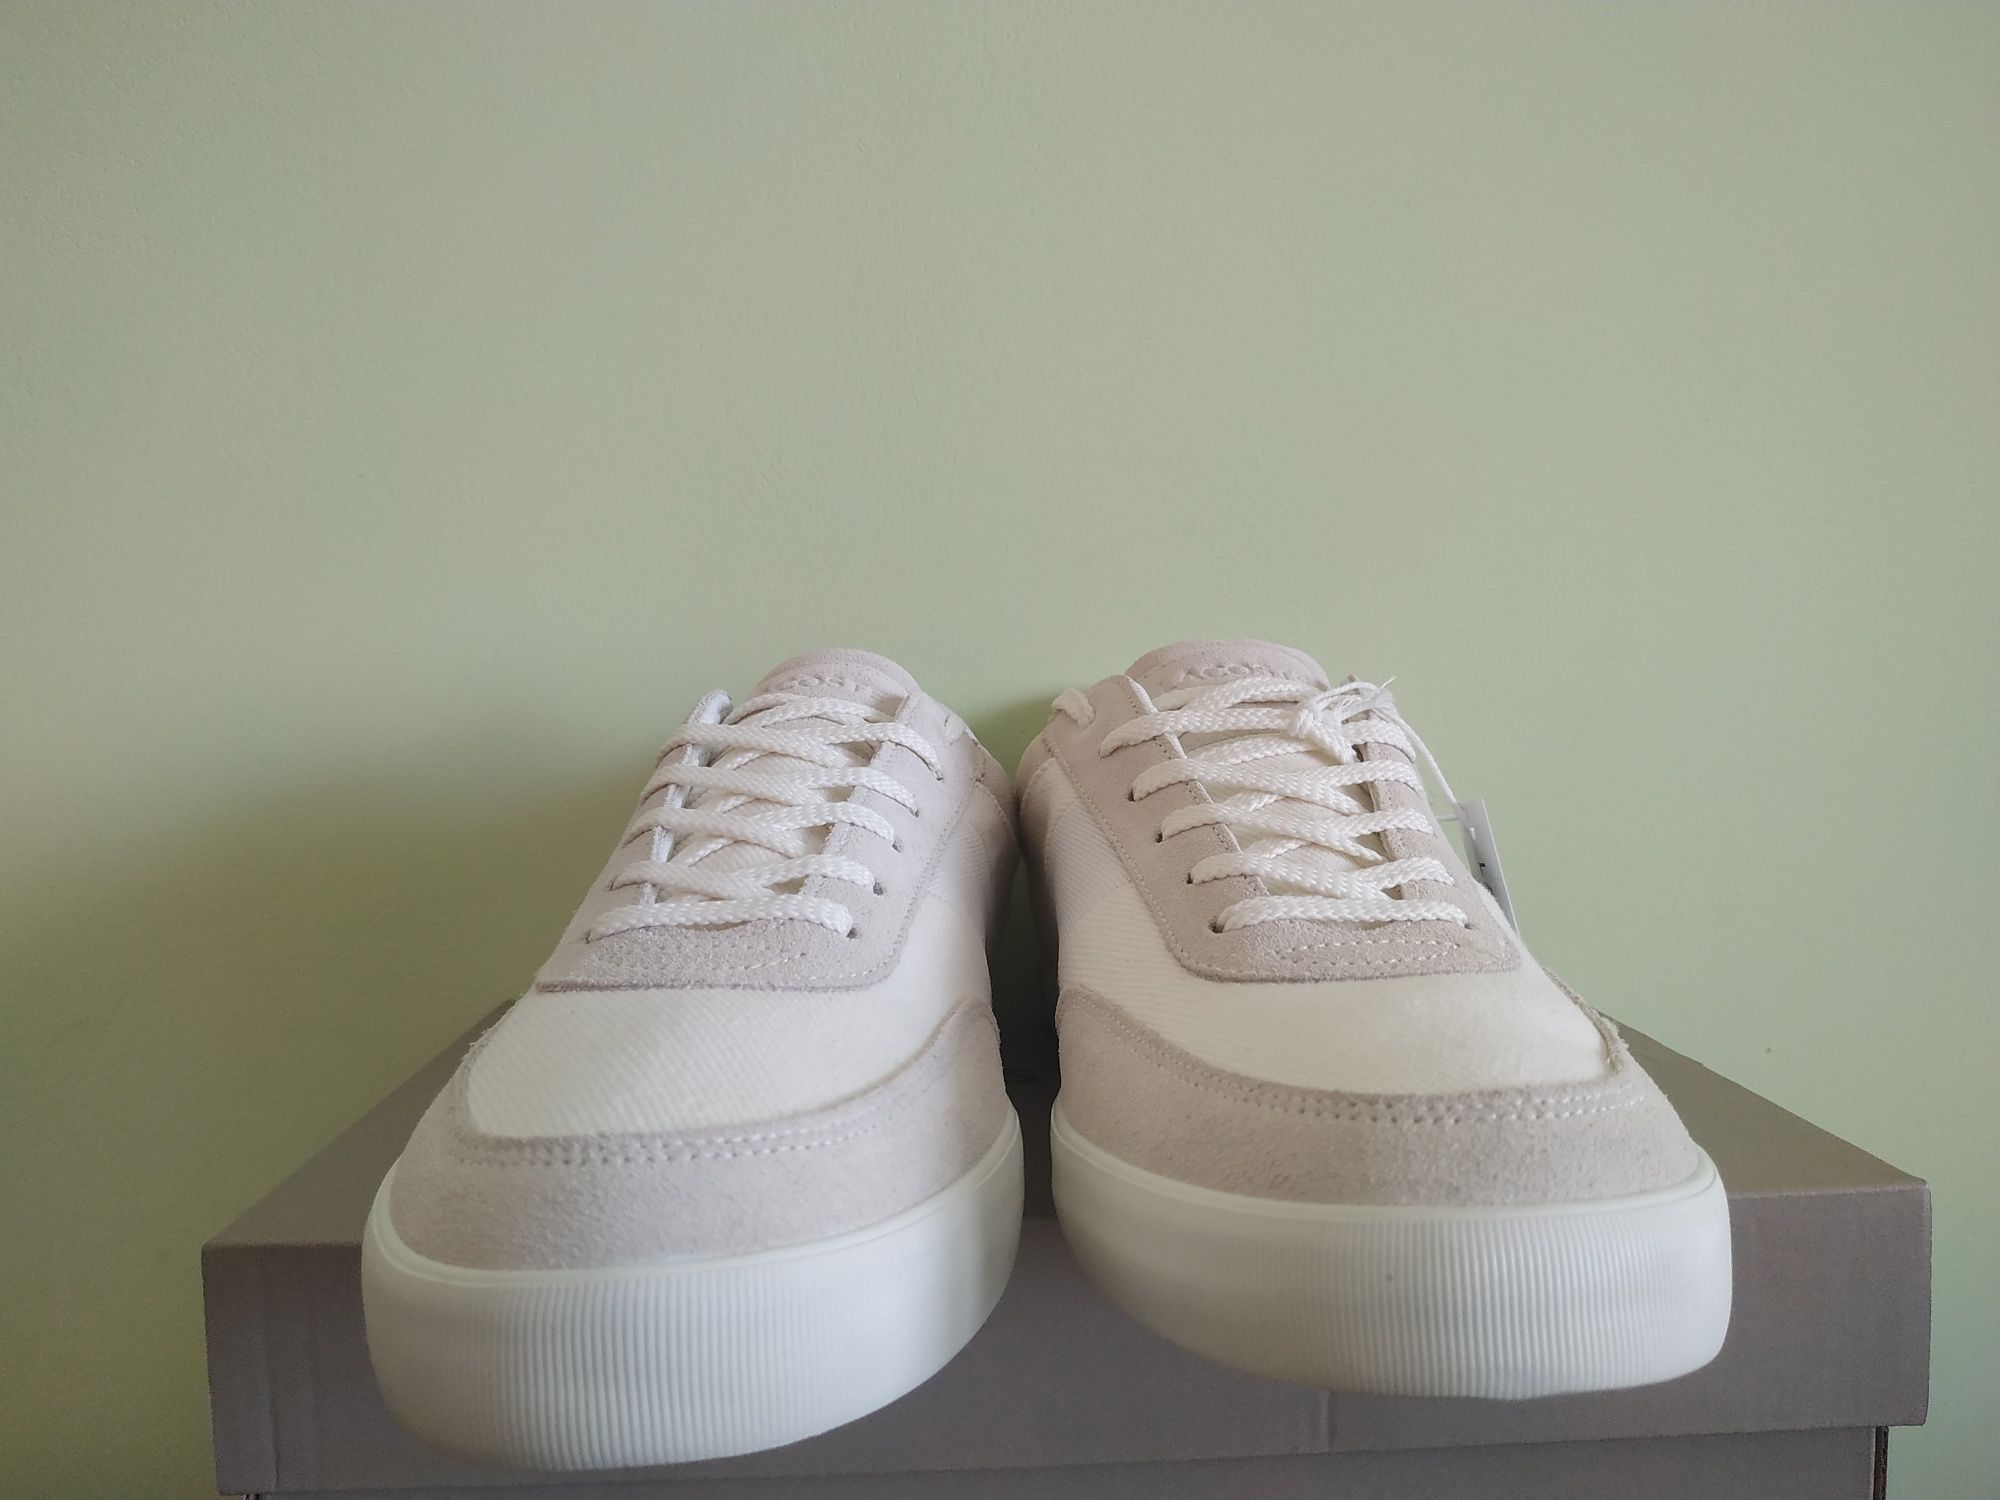 OUTLET! Buty męskie sneakersy Lacoste Court Master 220 1 CMA r.42